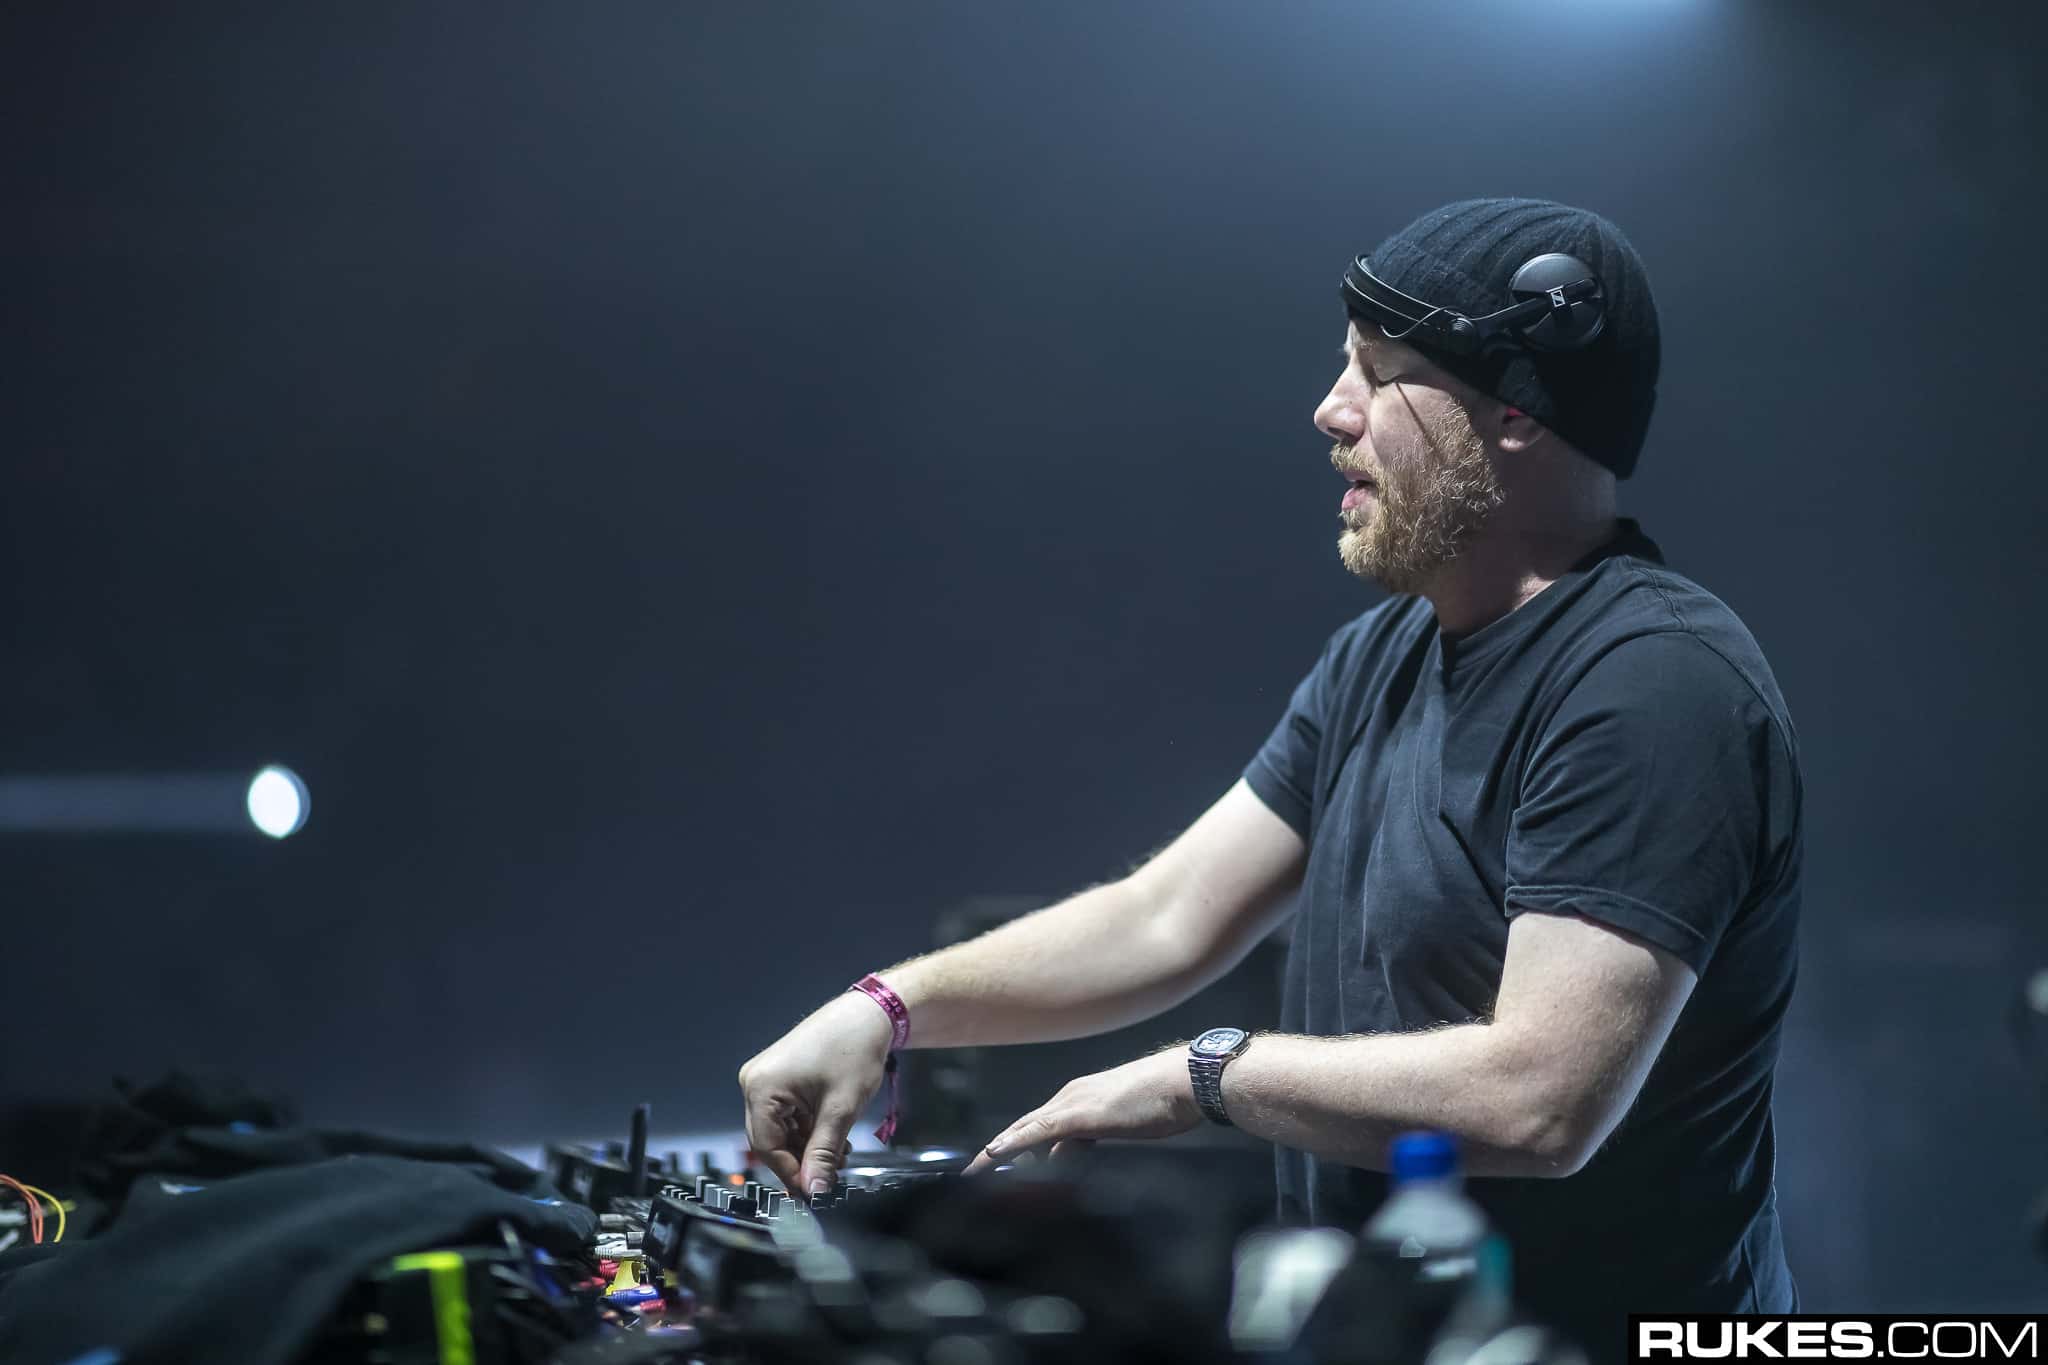 Eric Prydz iconic 2006 hit ‘Proper Education’ climbs back on Beatport charts